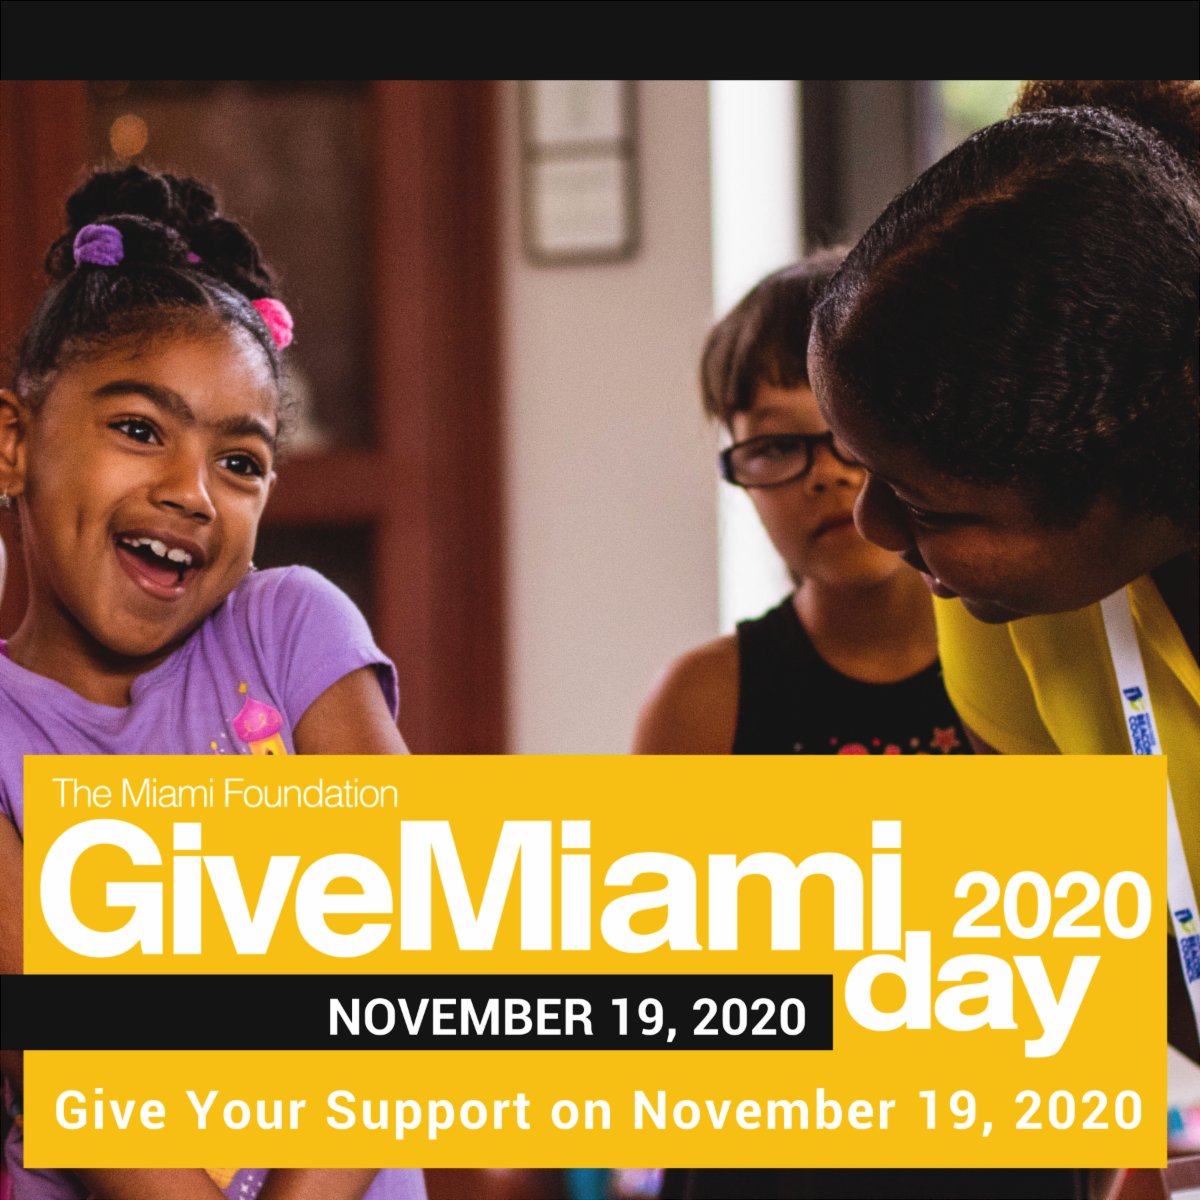 One small act can make a BIG difference on Give Miami Day (Yes it's today!) To donate visit conta.cc/3lKijYL